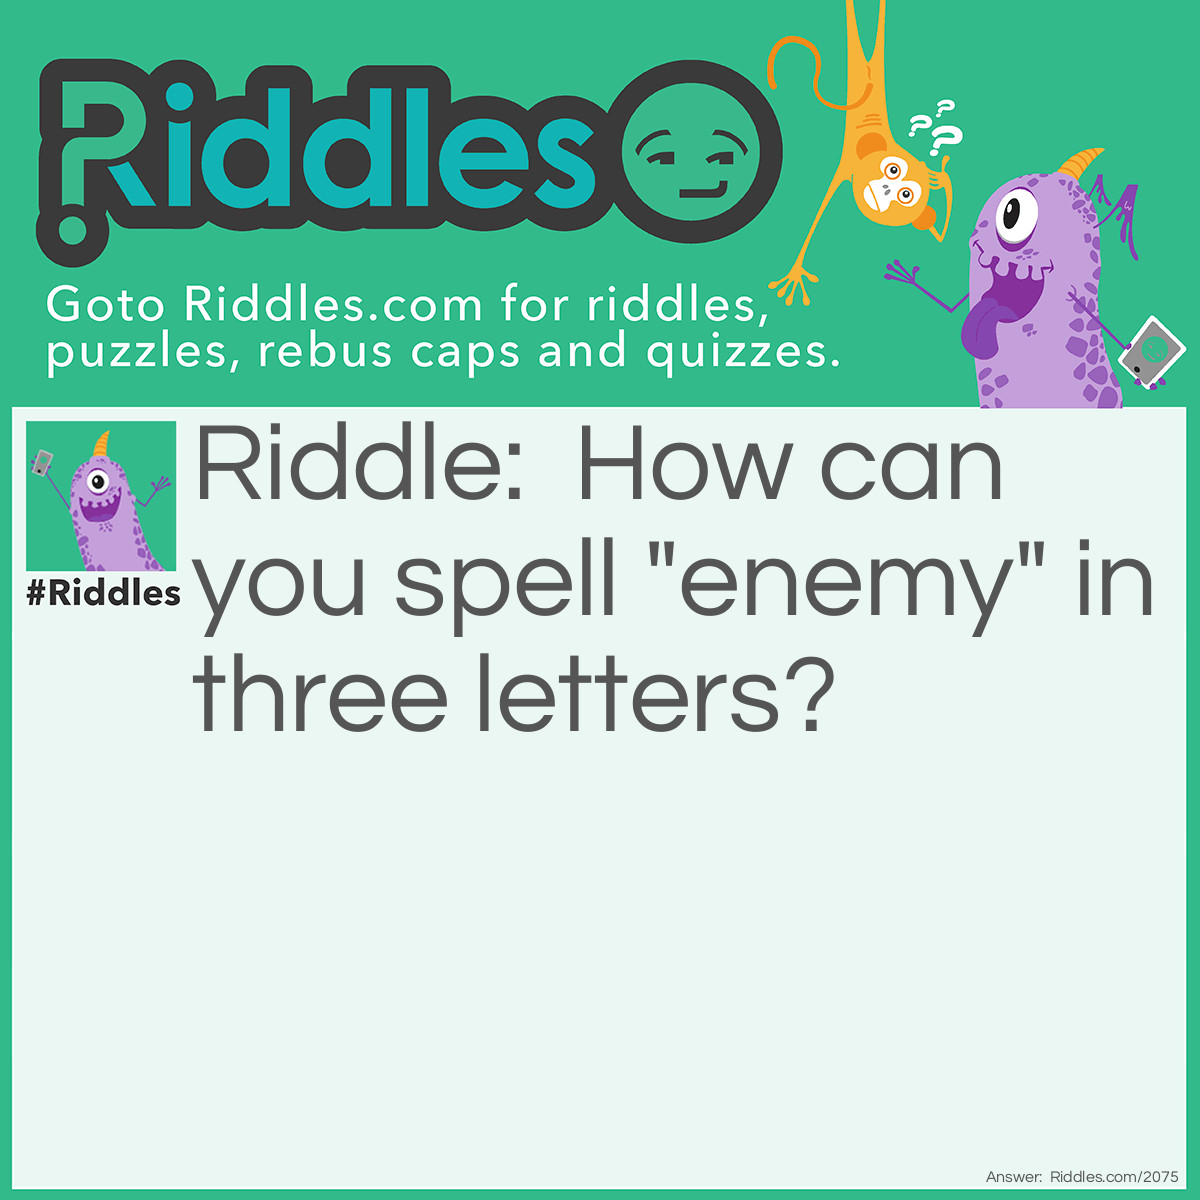 Riddle: How can you spell "enemy" in three letters? Answer: F O E.